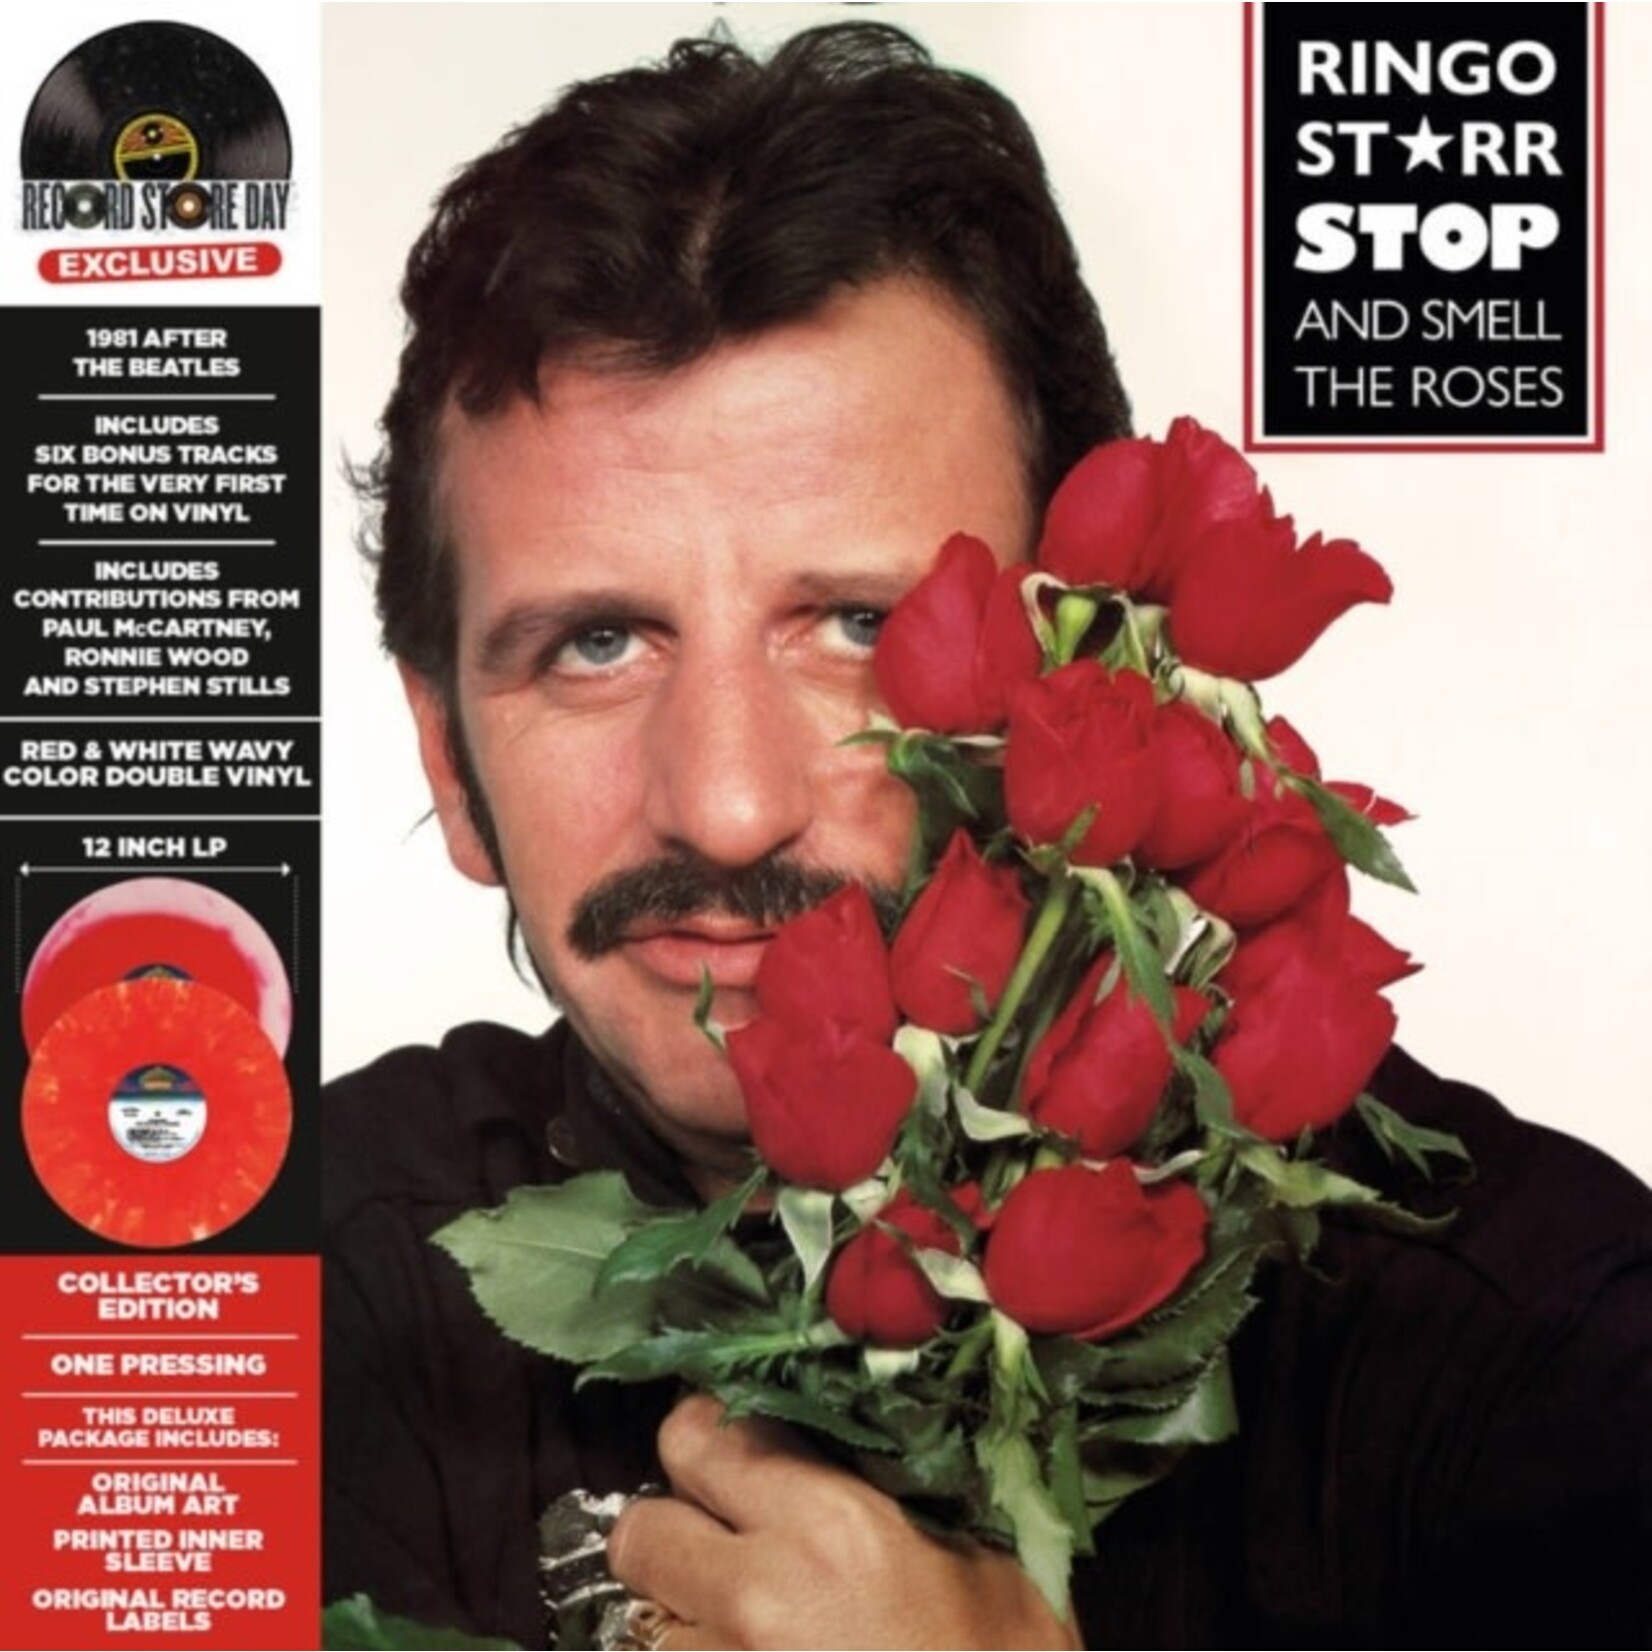 Ringo Starr - Stop And Smell The Roses (Coloured Vinyl) [2LP] (RSD2023)